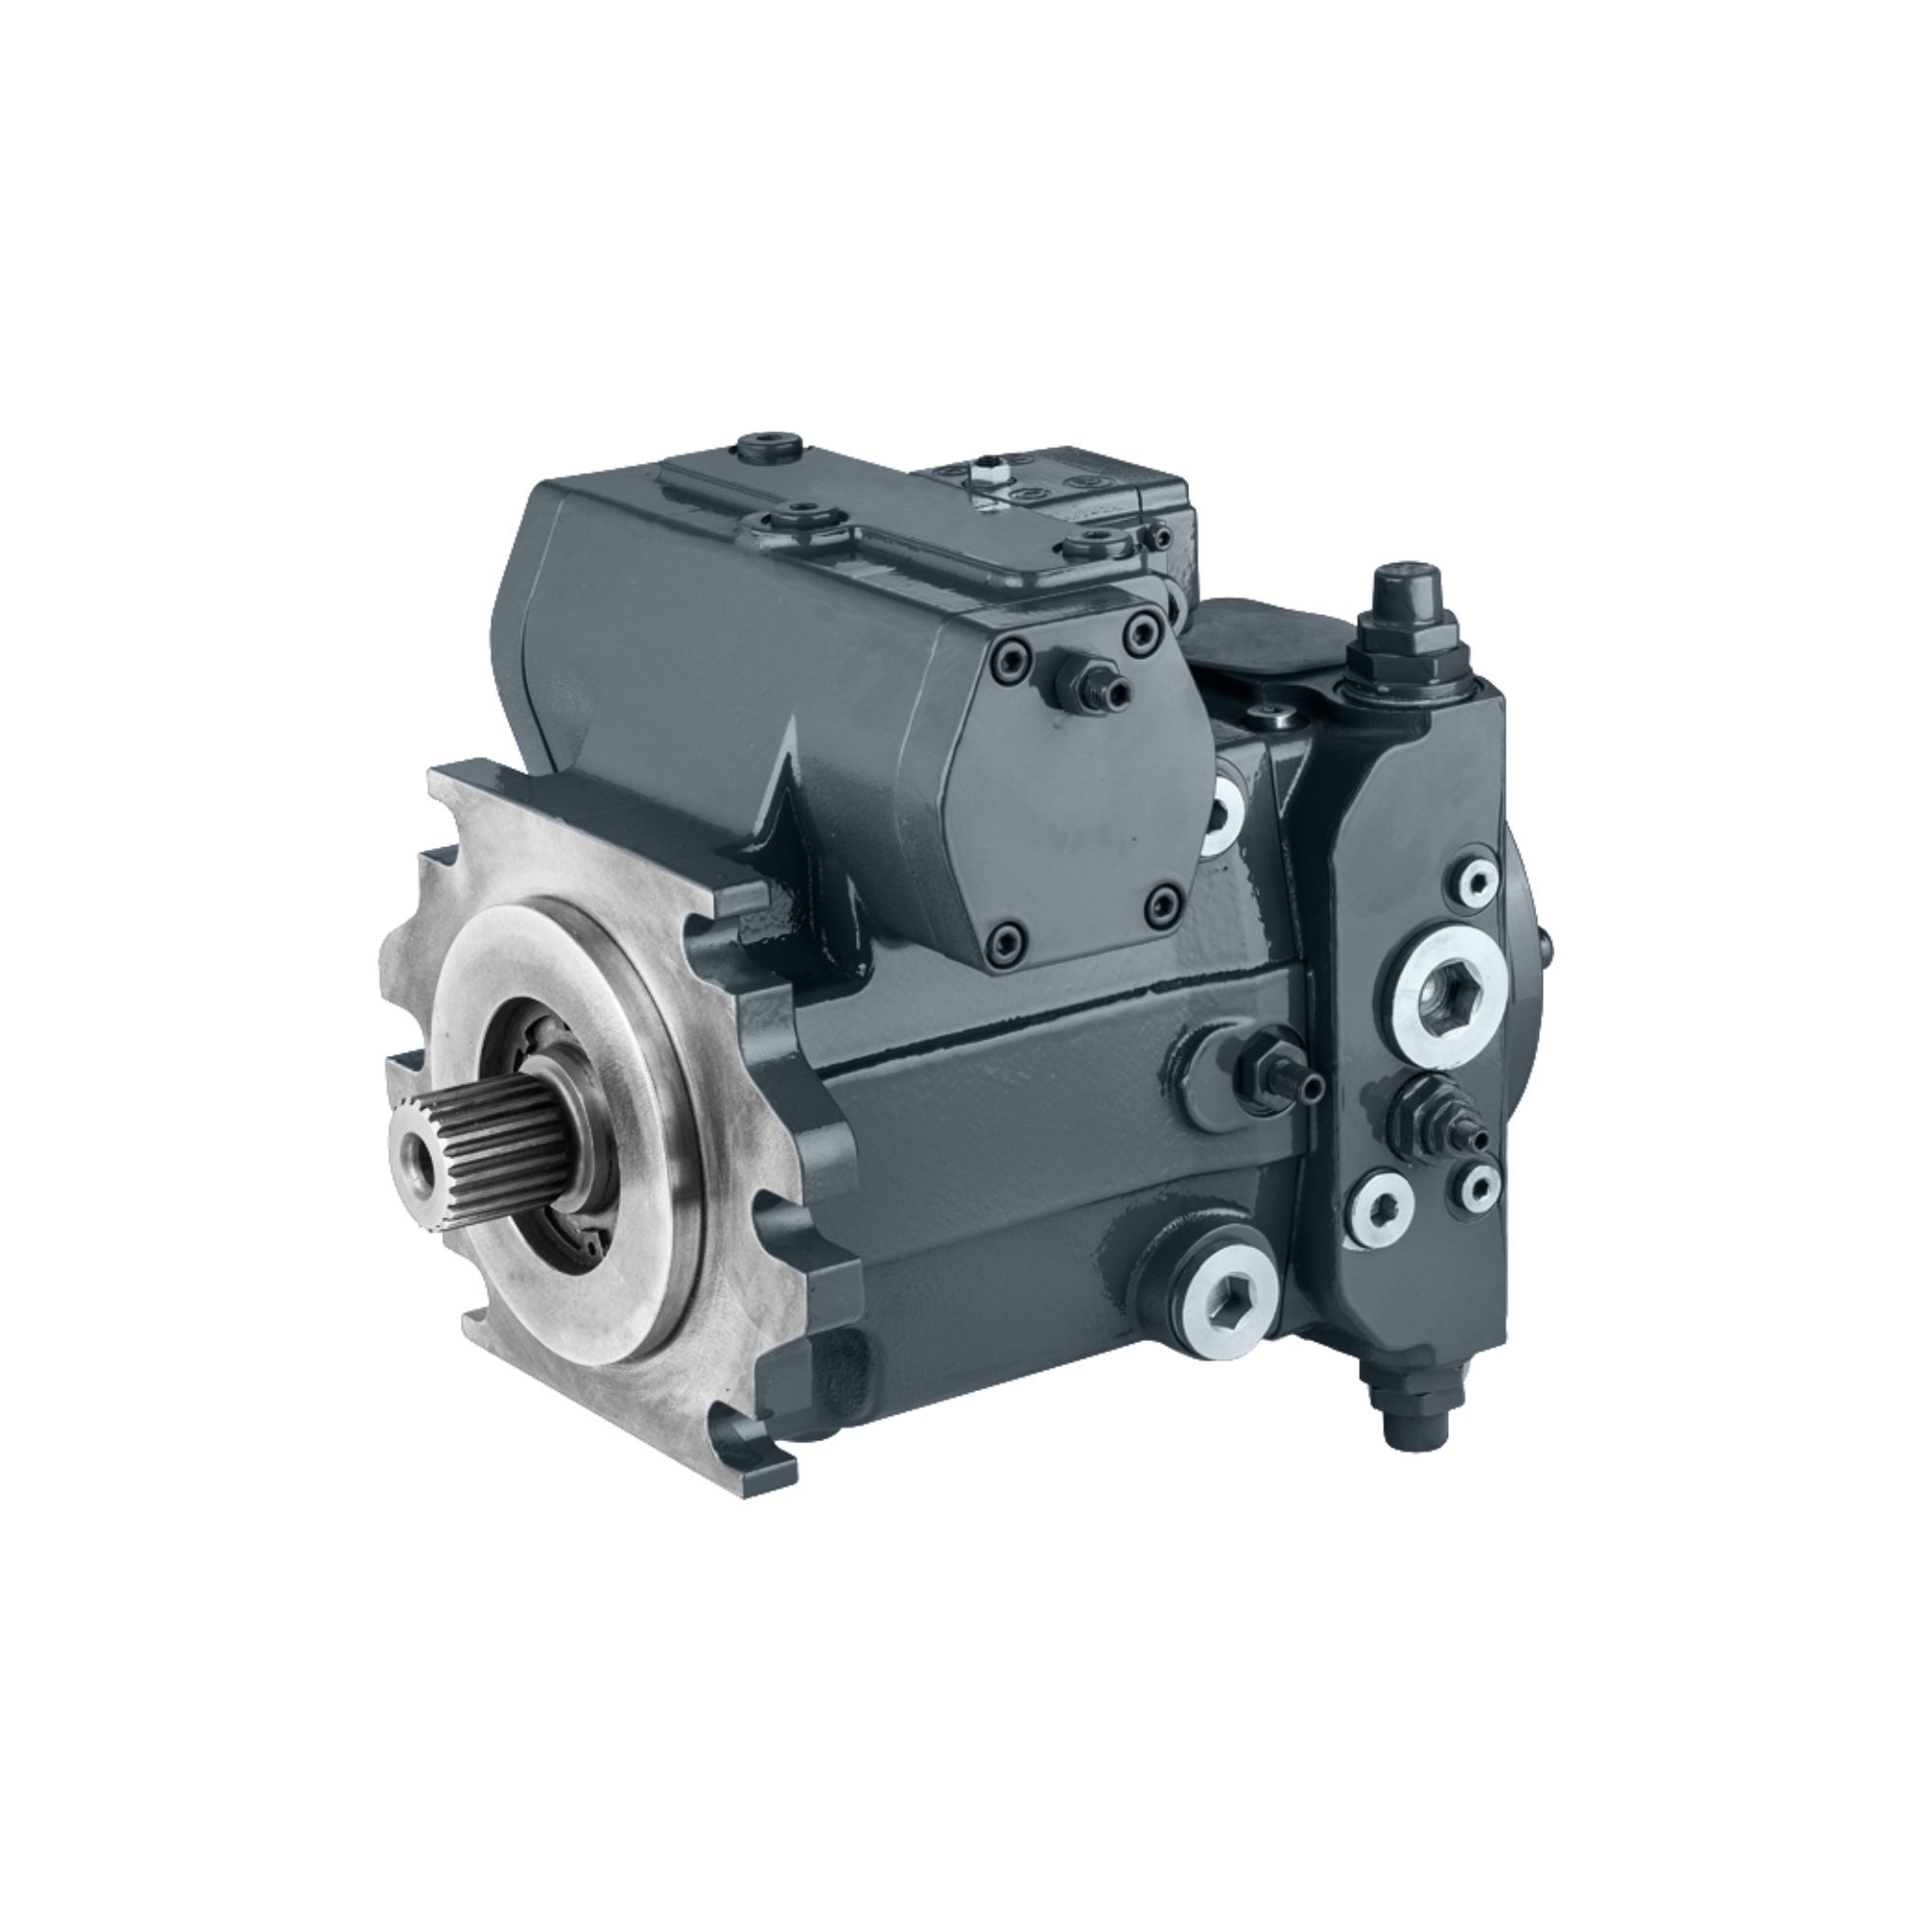 Key Features and Specifications of A4VG Axial Piston Pumps